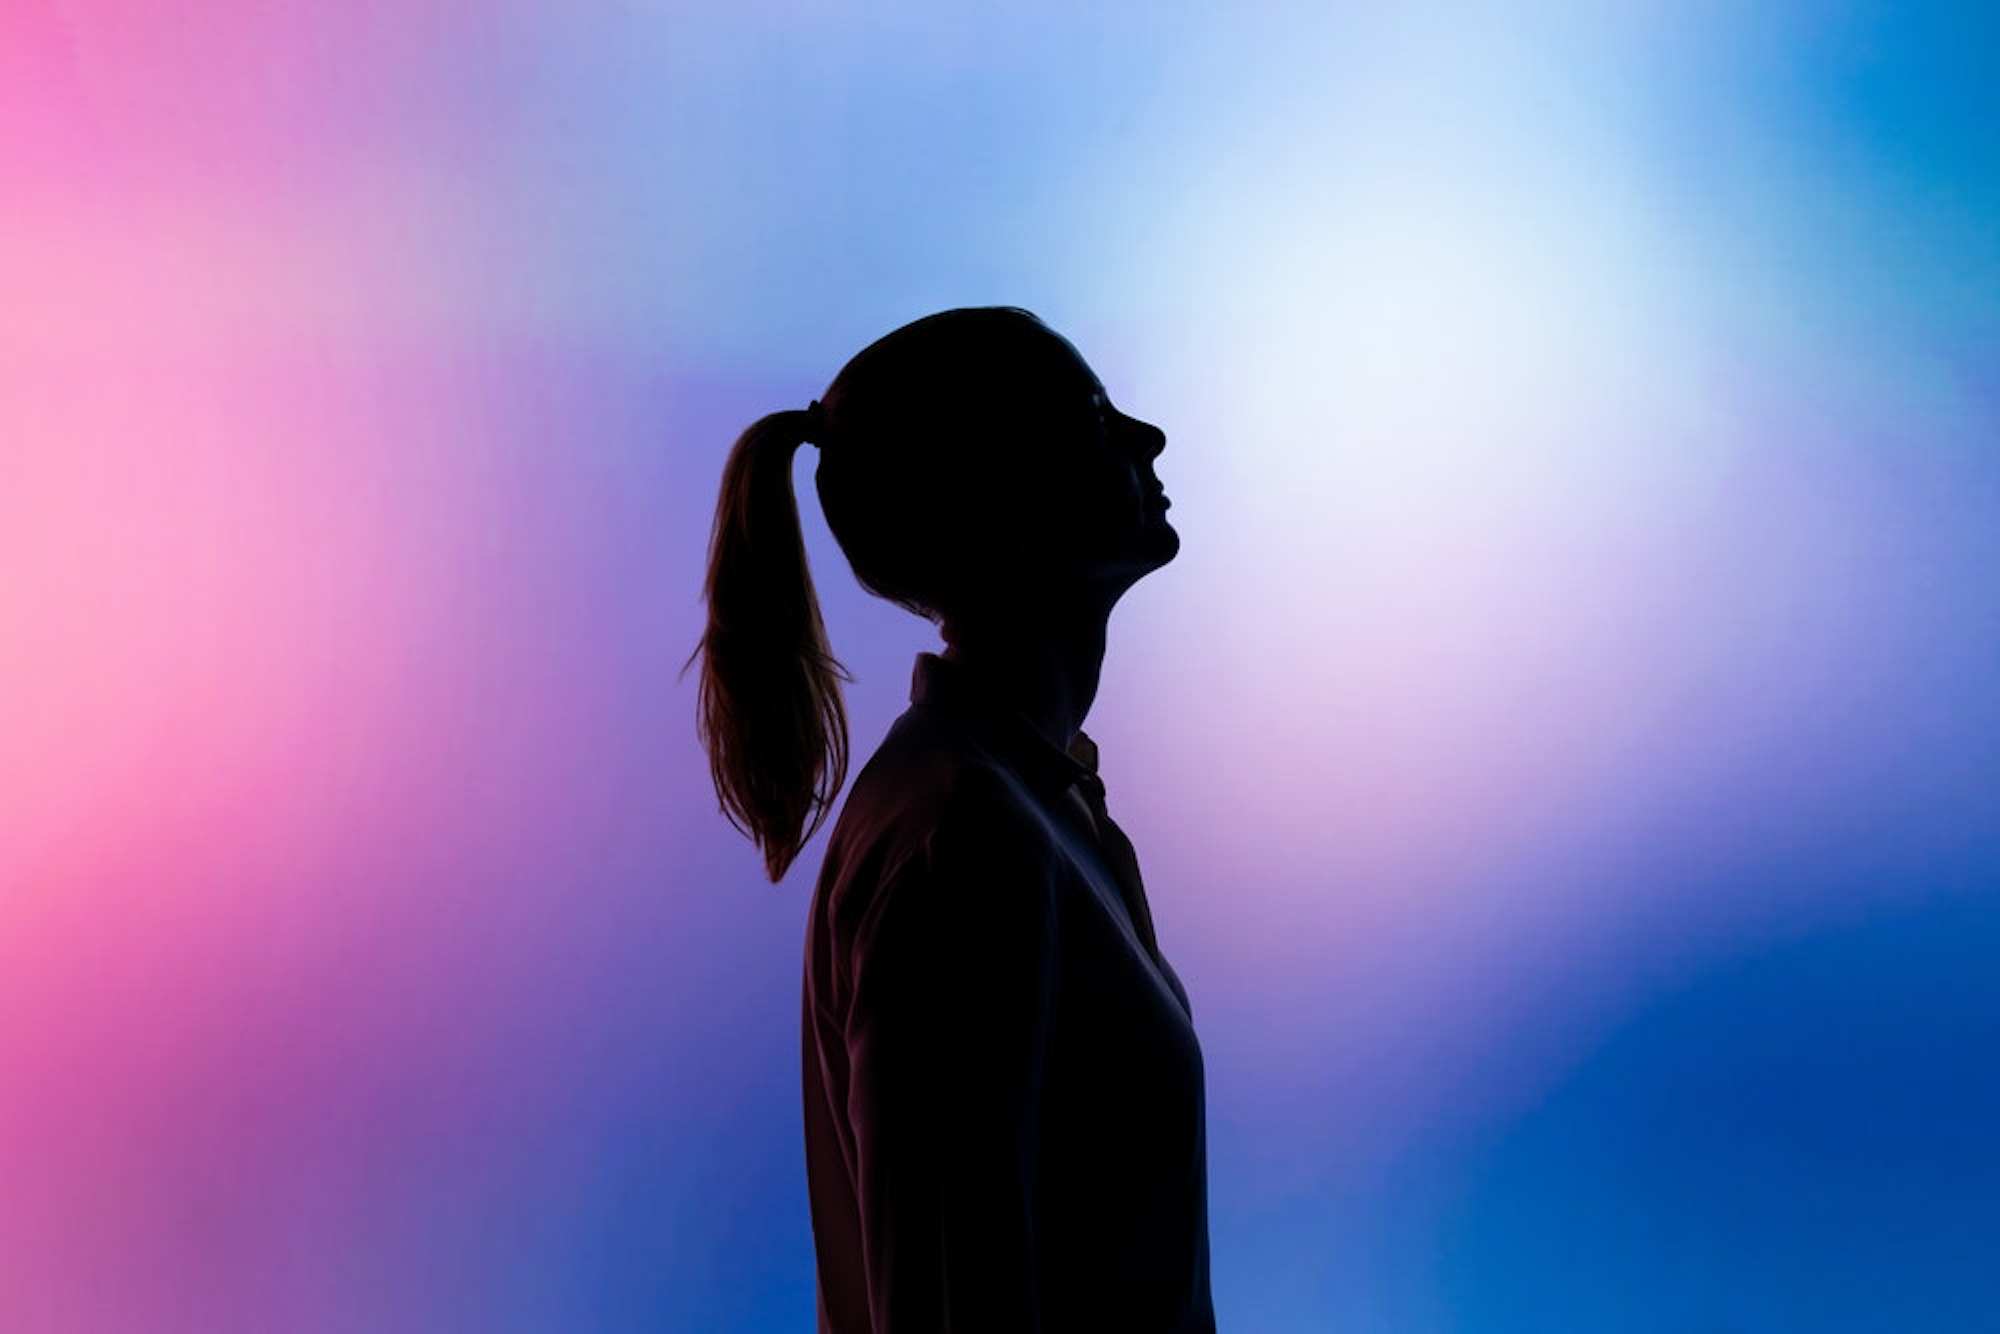 Dark outline of a woman with a ponytail against a colourful hazy background